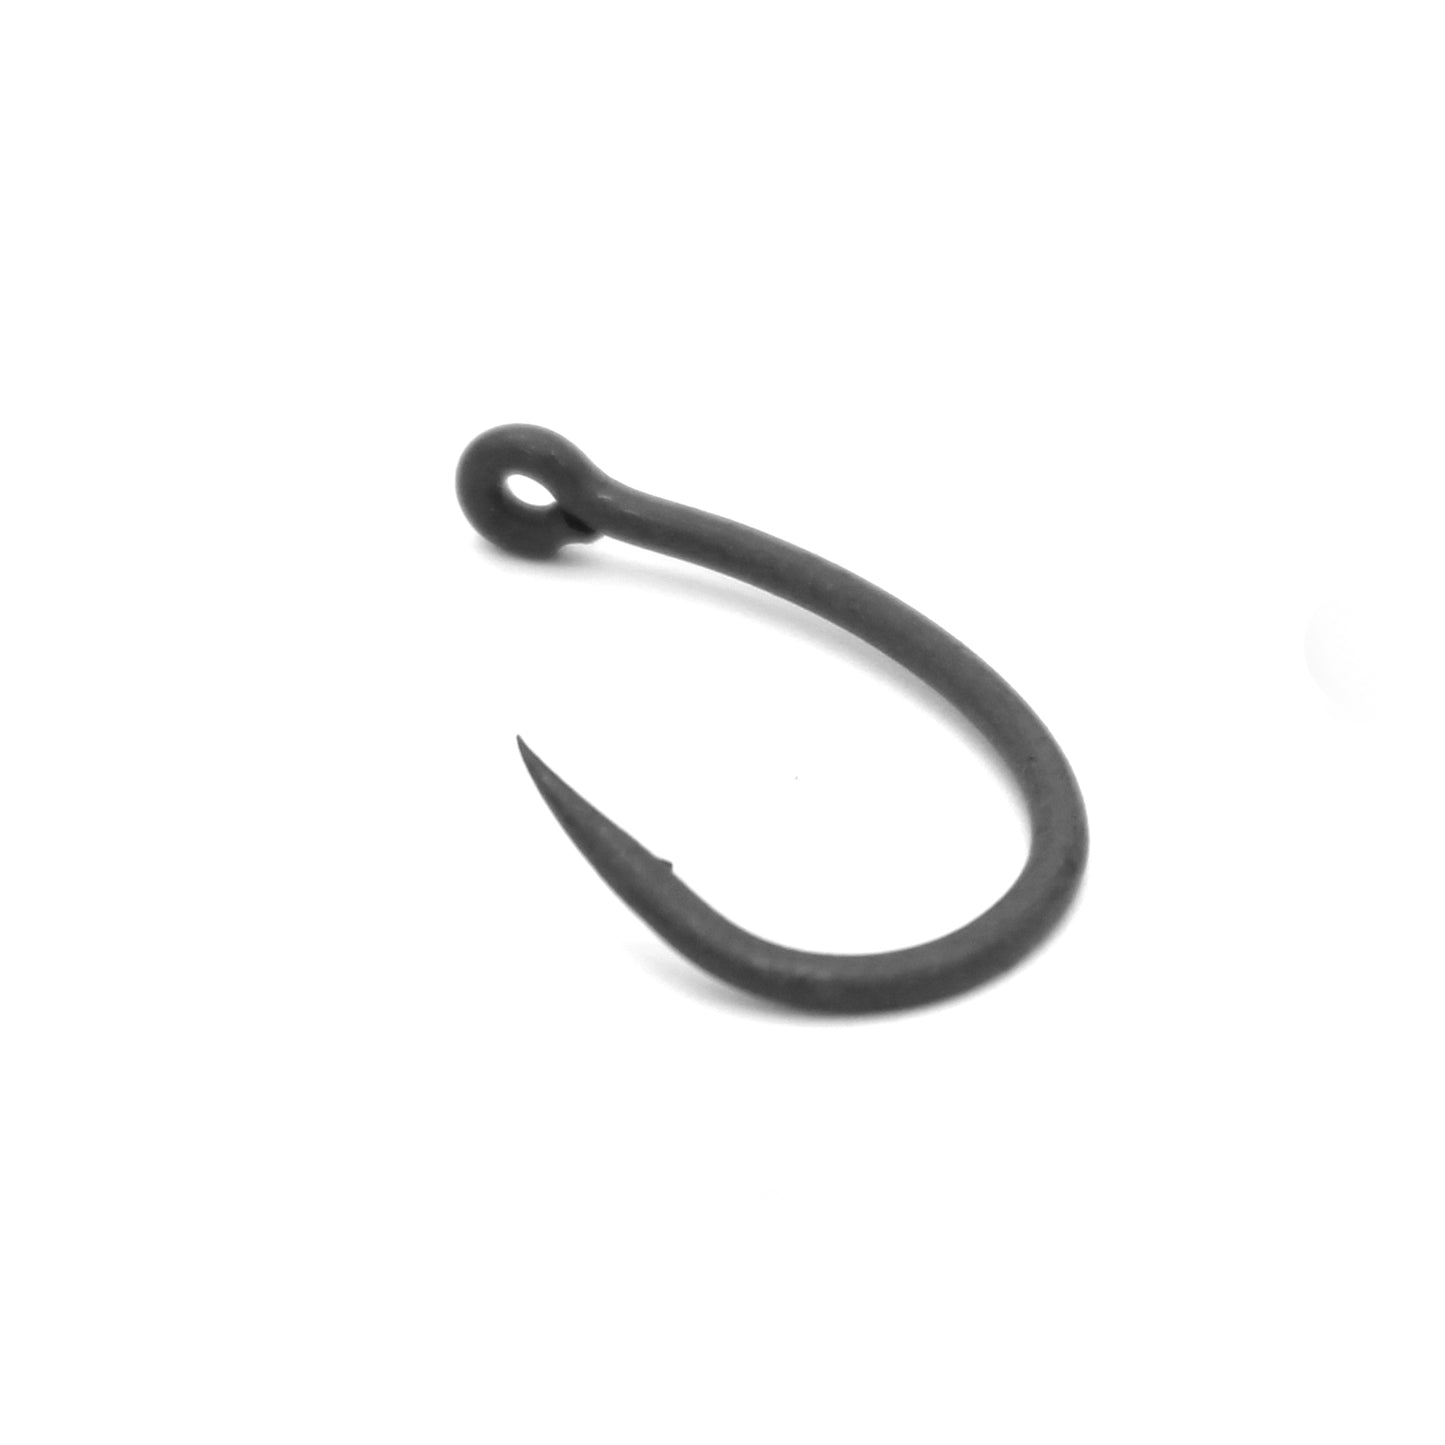 Deception Angling D-CRK Micro Barbed Fishing Hook